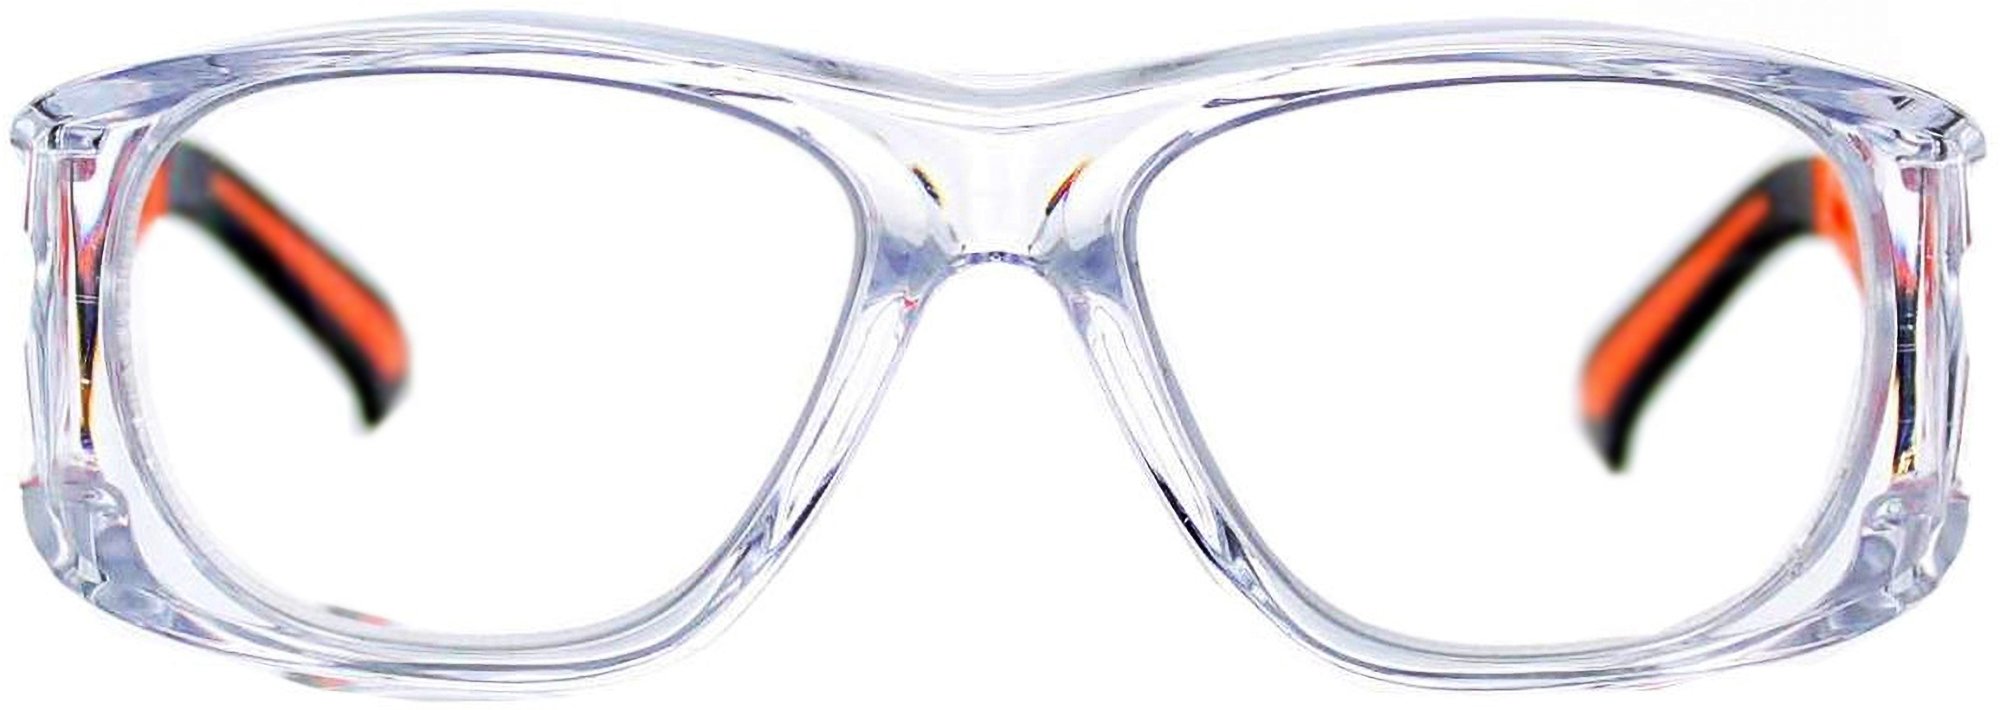 Safety Reading Glasses - Available +1.00 to +3.00 - RX Safety